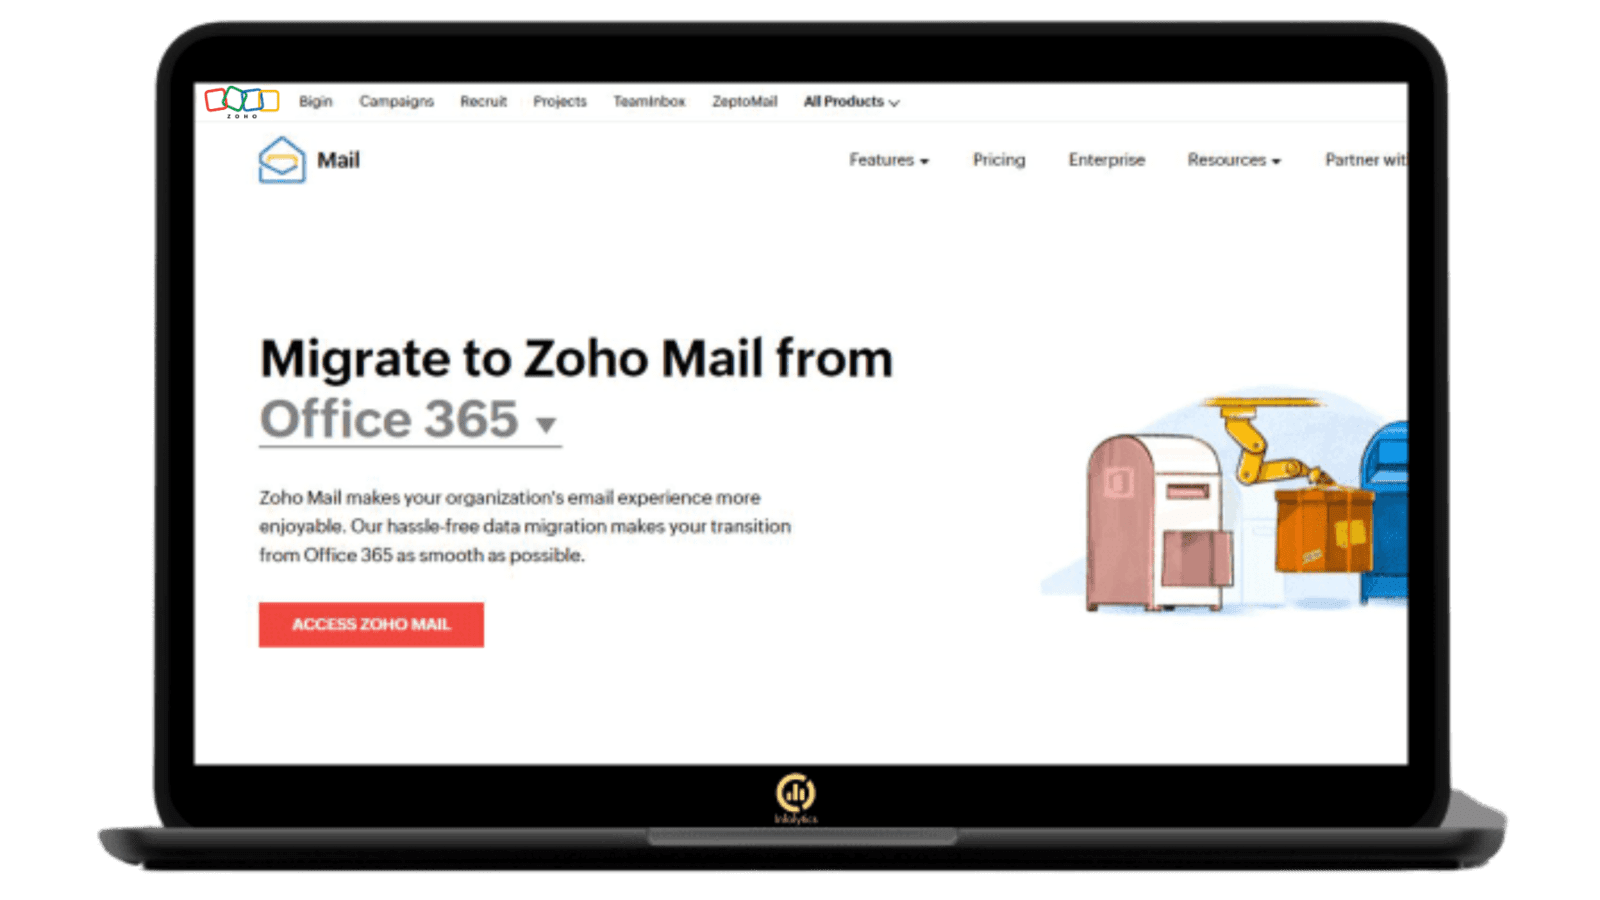 Zoho Mail offers a one-click secure data migration process from major email providers such as Gmail, Microsoft Office 365, and Exchange. 